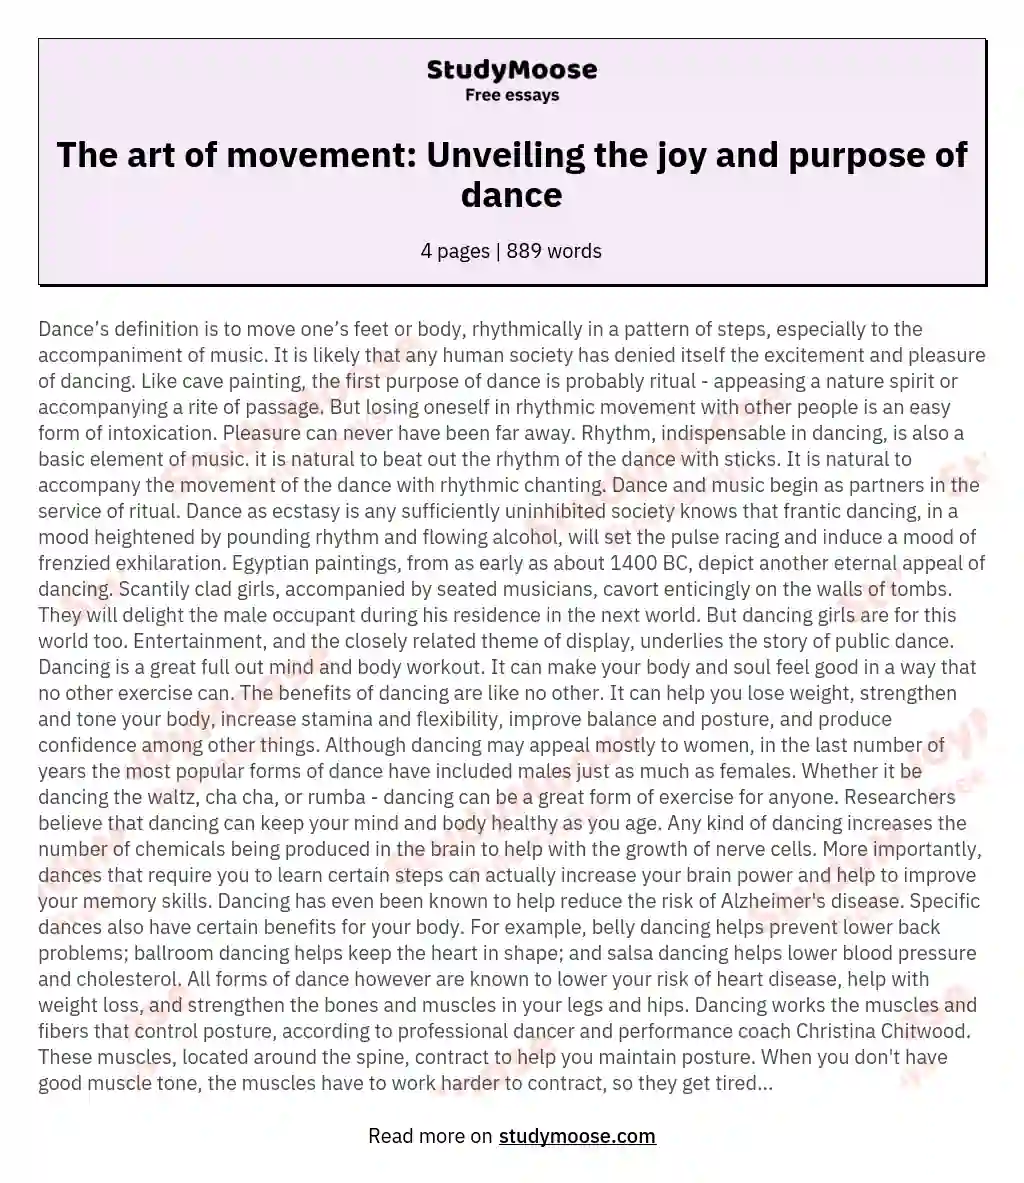 The art of movement: Unveiling the joy and purpose of dance essay